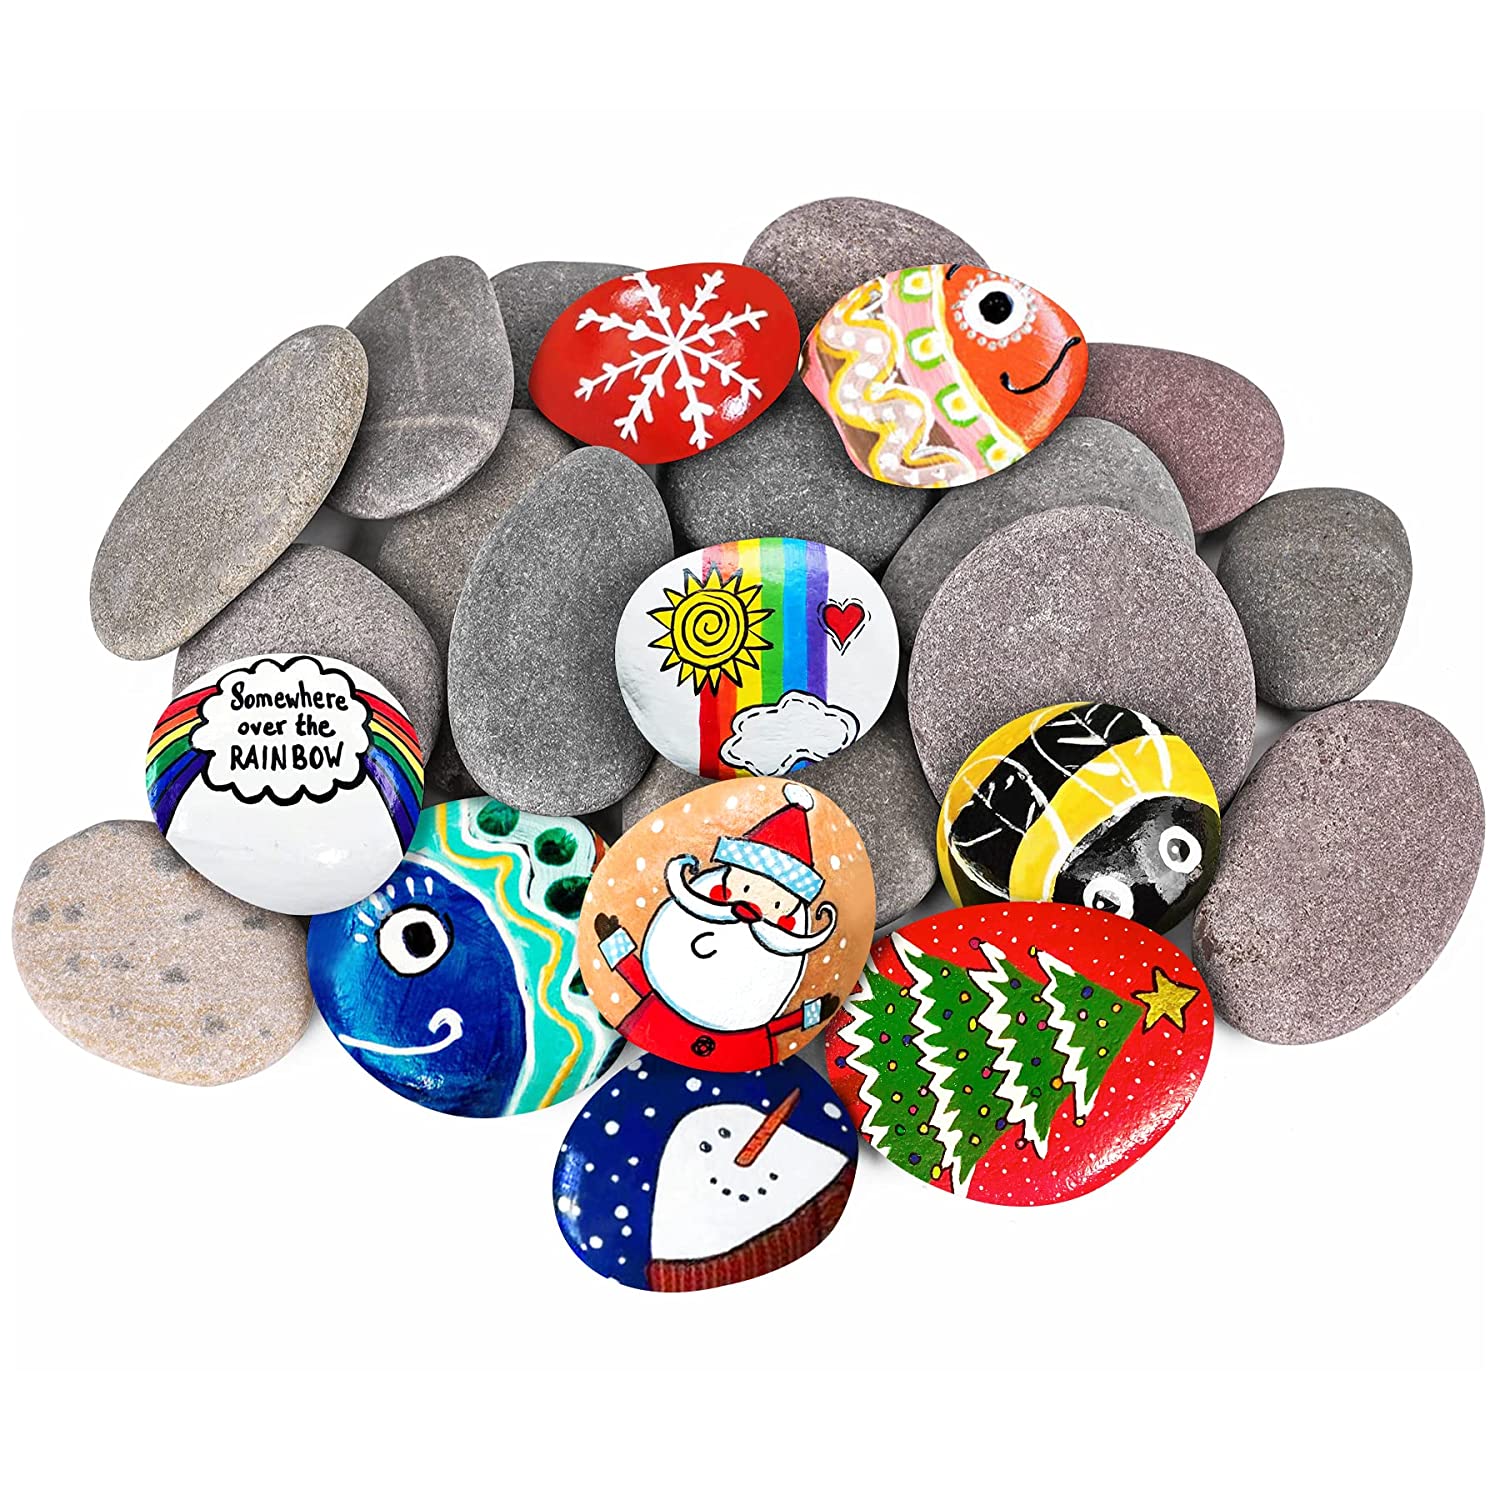 28 Pcs River Rocks for Painting 6 Pounds 2-3inches Naturally Big Rocks to  Paint Flat Craft Painting Rocks & 12Pcs Paint Brushes Kindness Stones for  Christmas DIY Gifts Art Crafts Decor